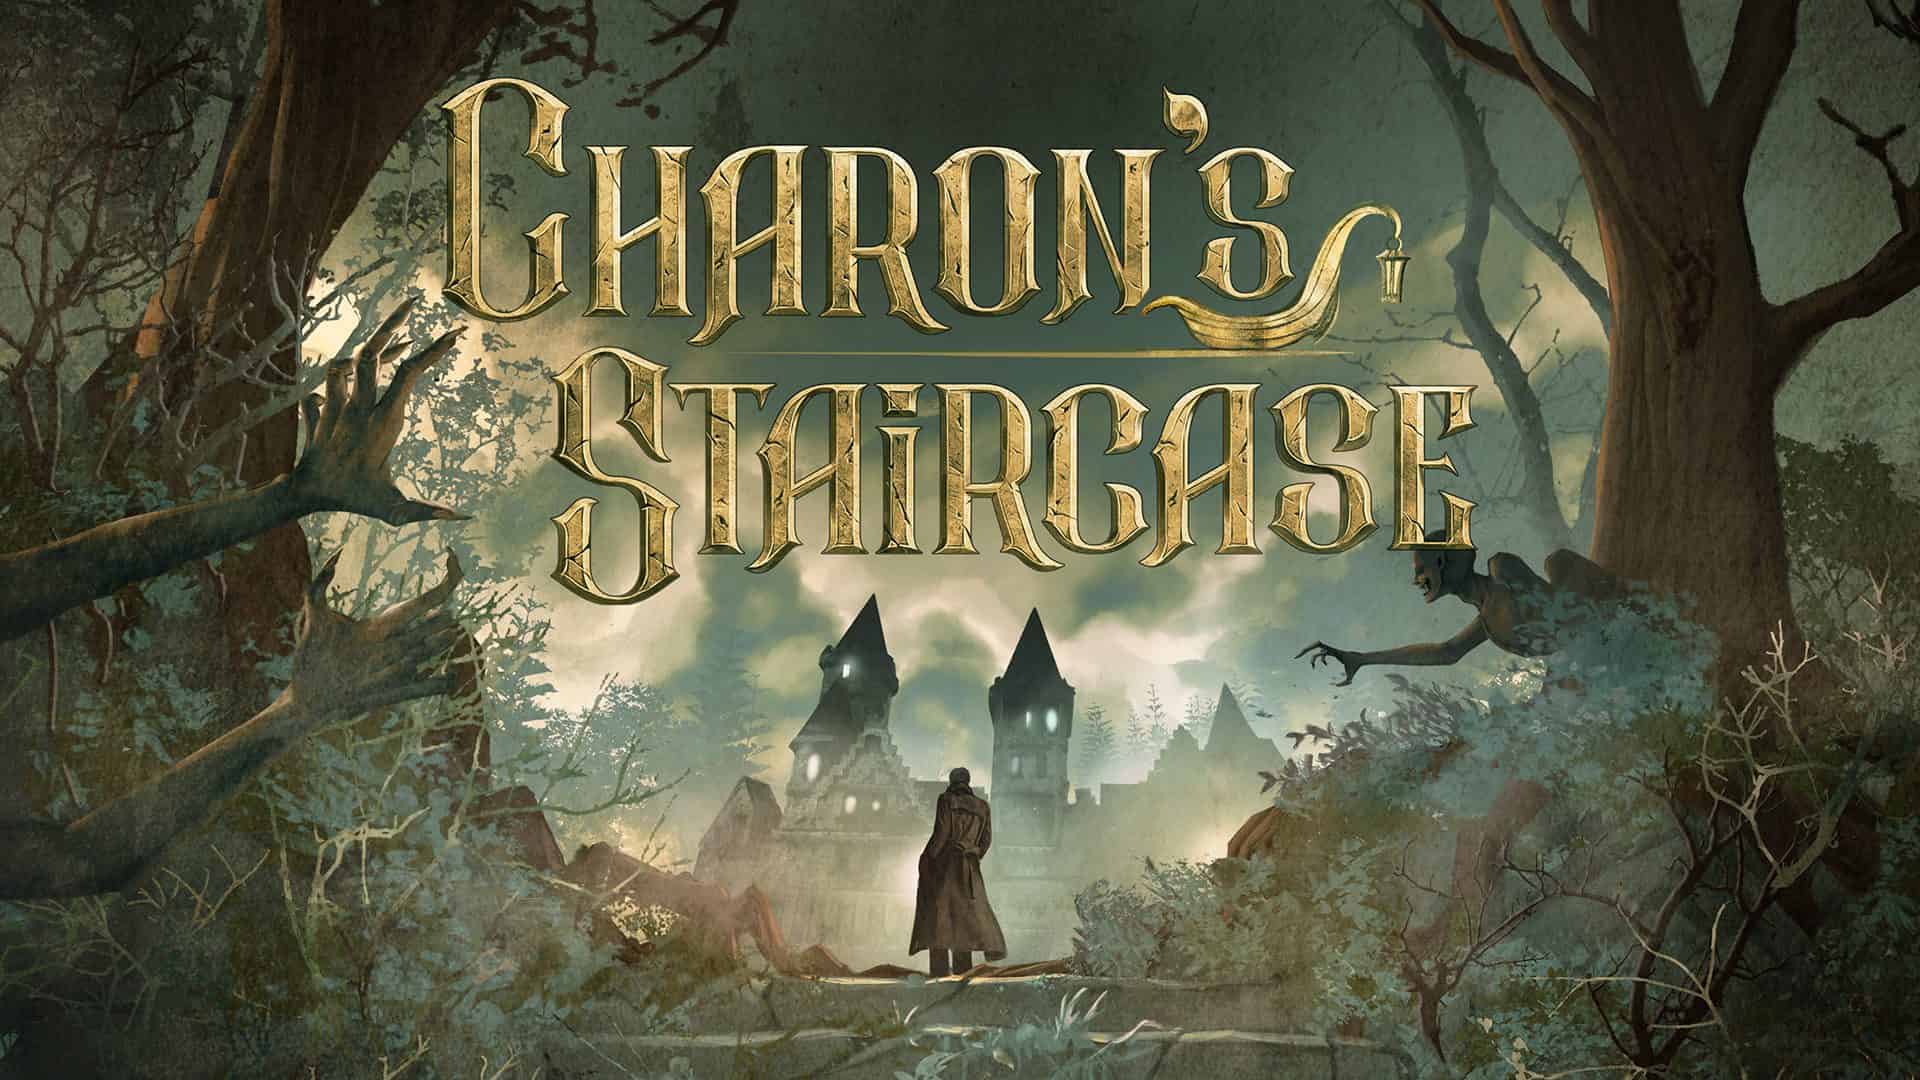 Charon’s Staircase game poster